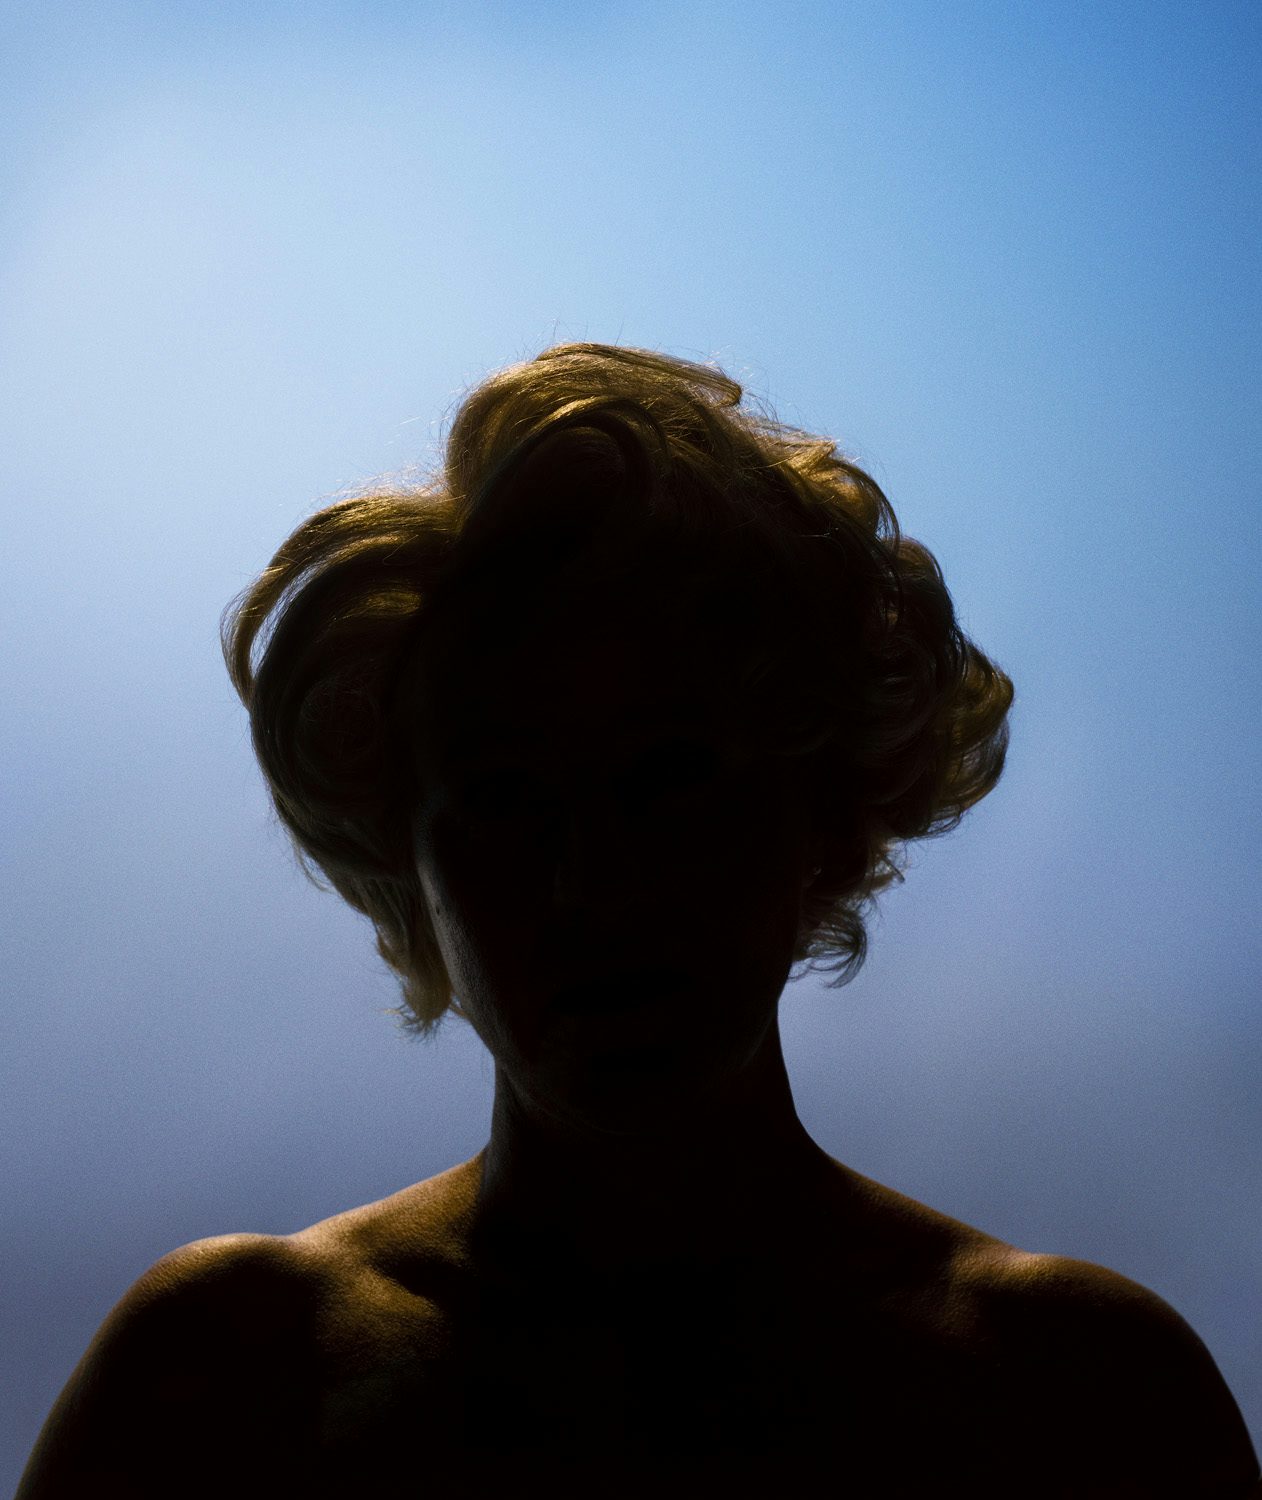 Image by Alex Prager shows the silhouette of a person's head with short coiffed hair and bare shoulders against a dusky blue backdrop